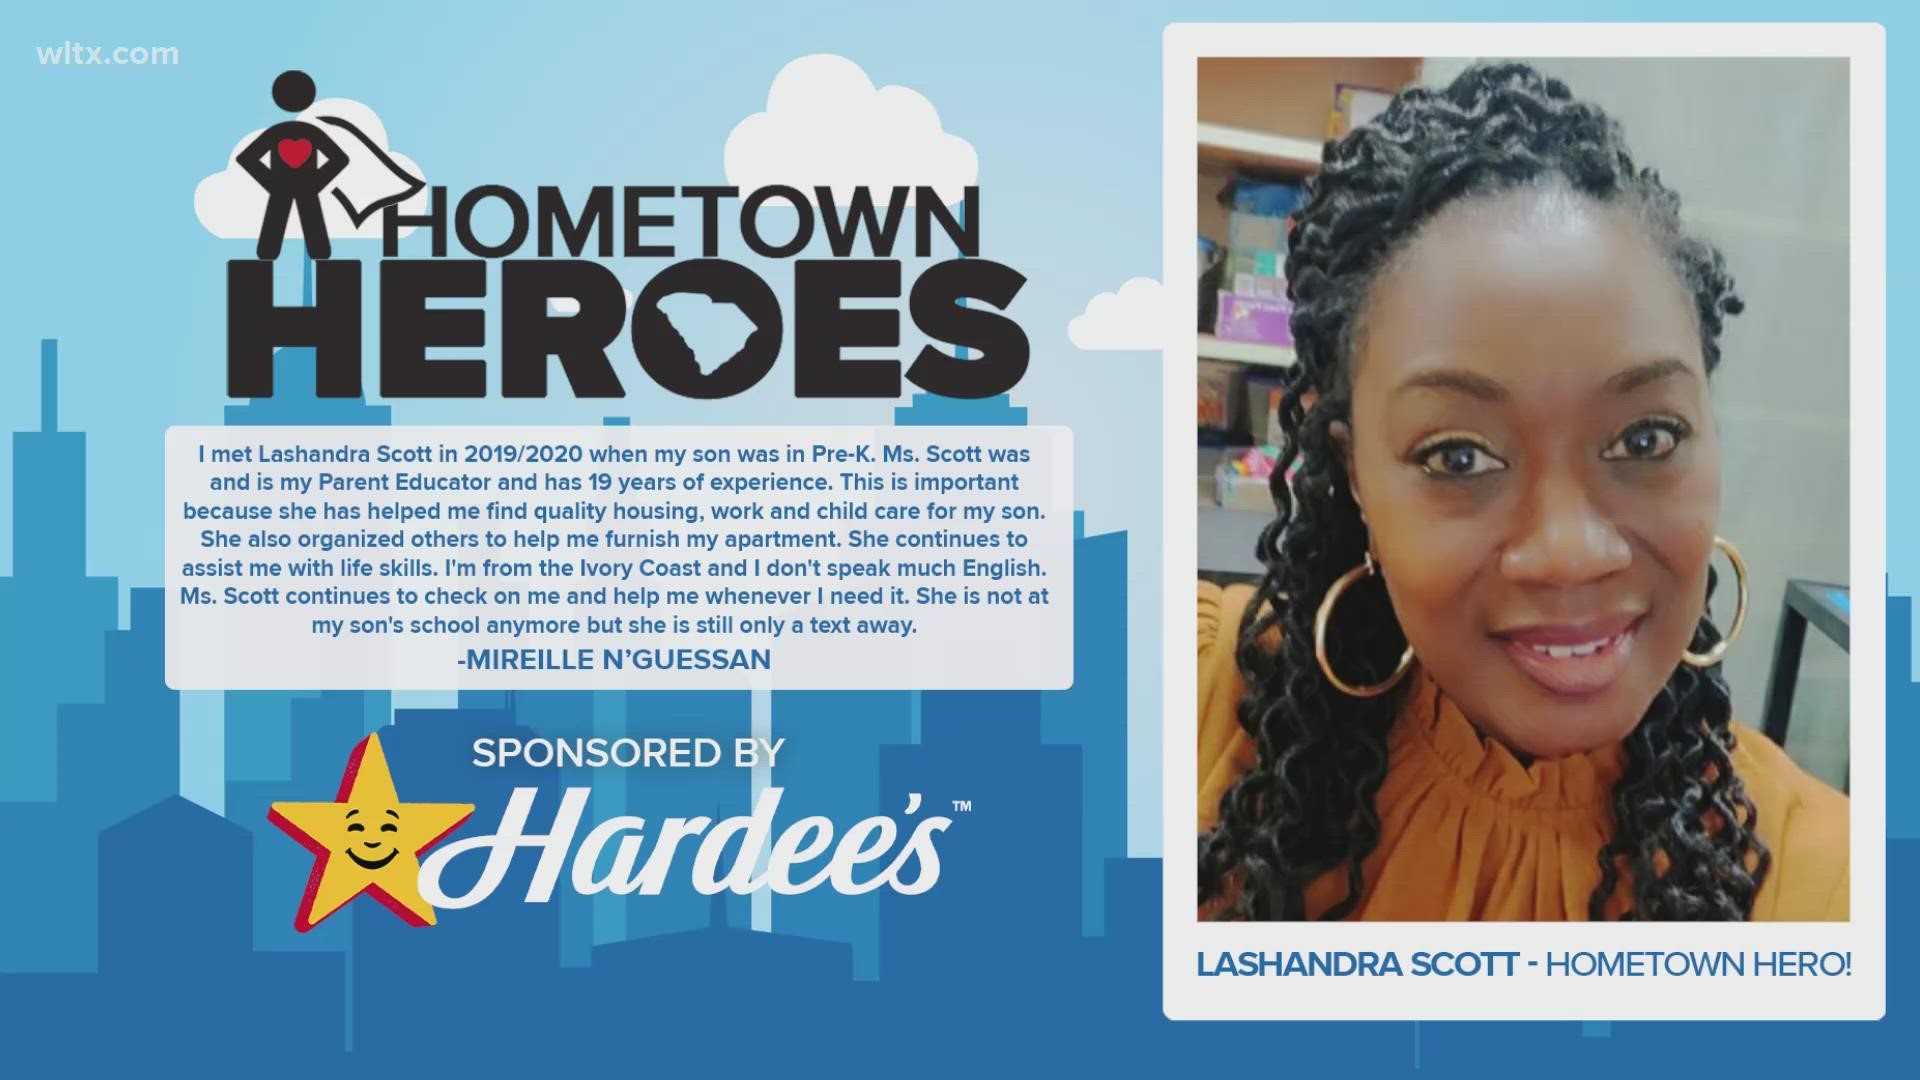 Lashandra is a parent educator with 19 years of experience and has helped parents find quality housing, work, and child care.